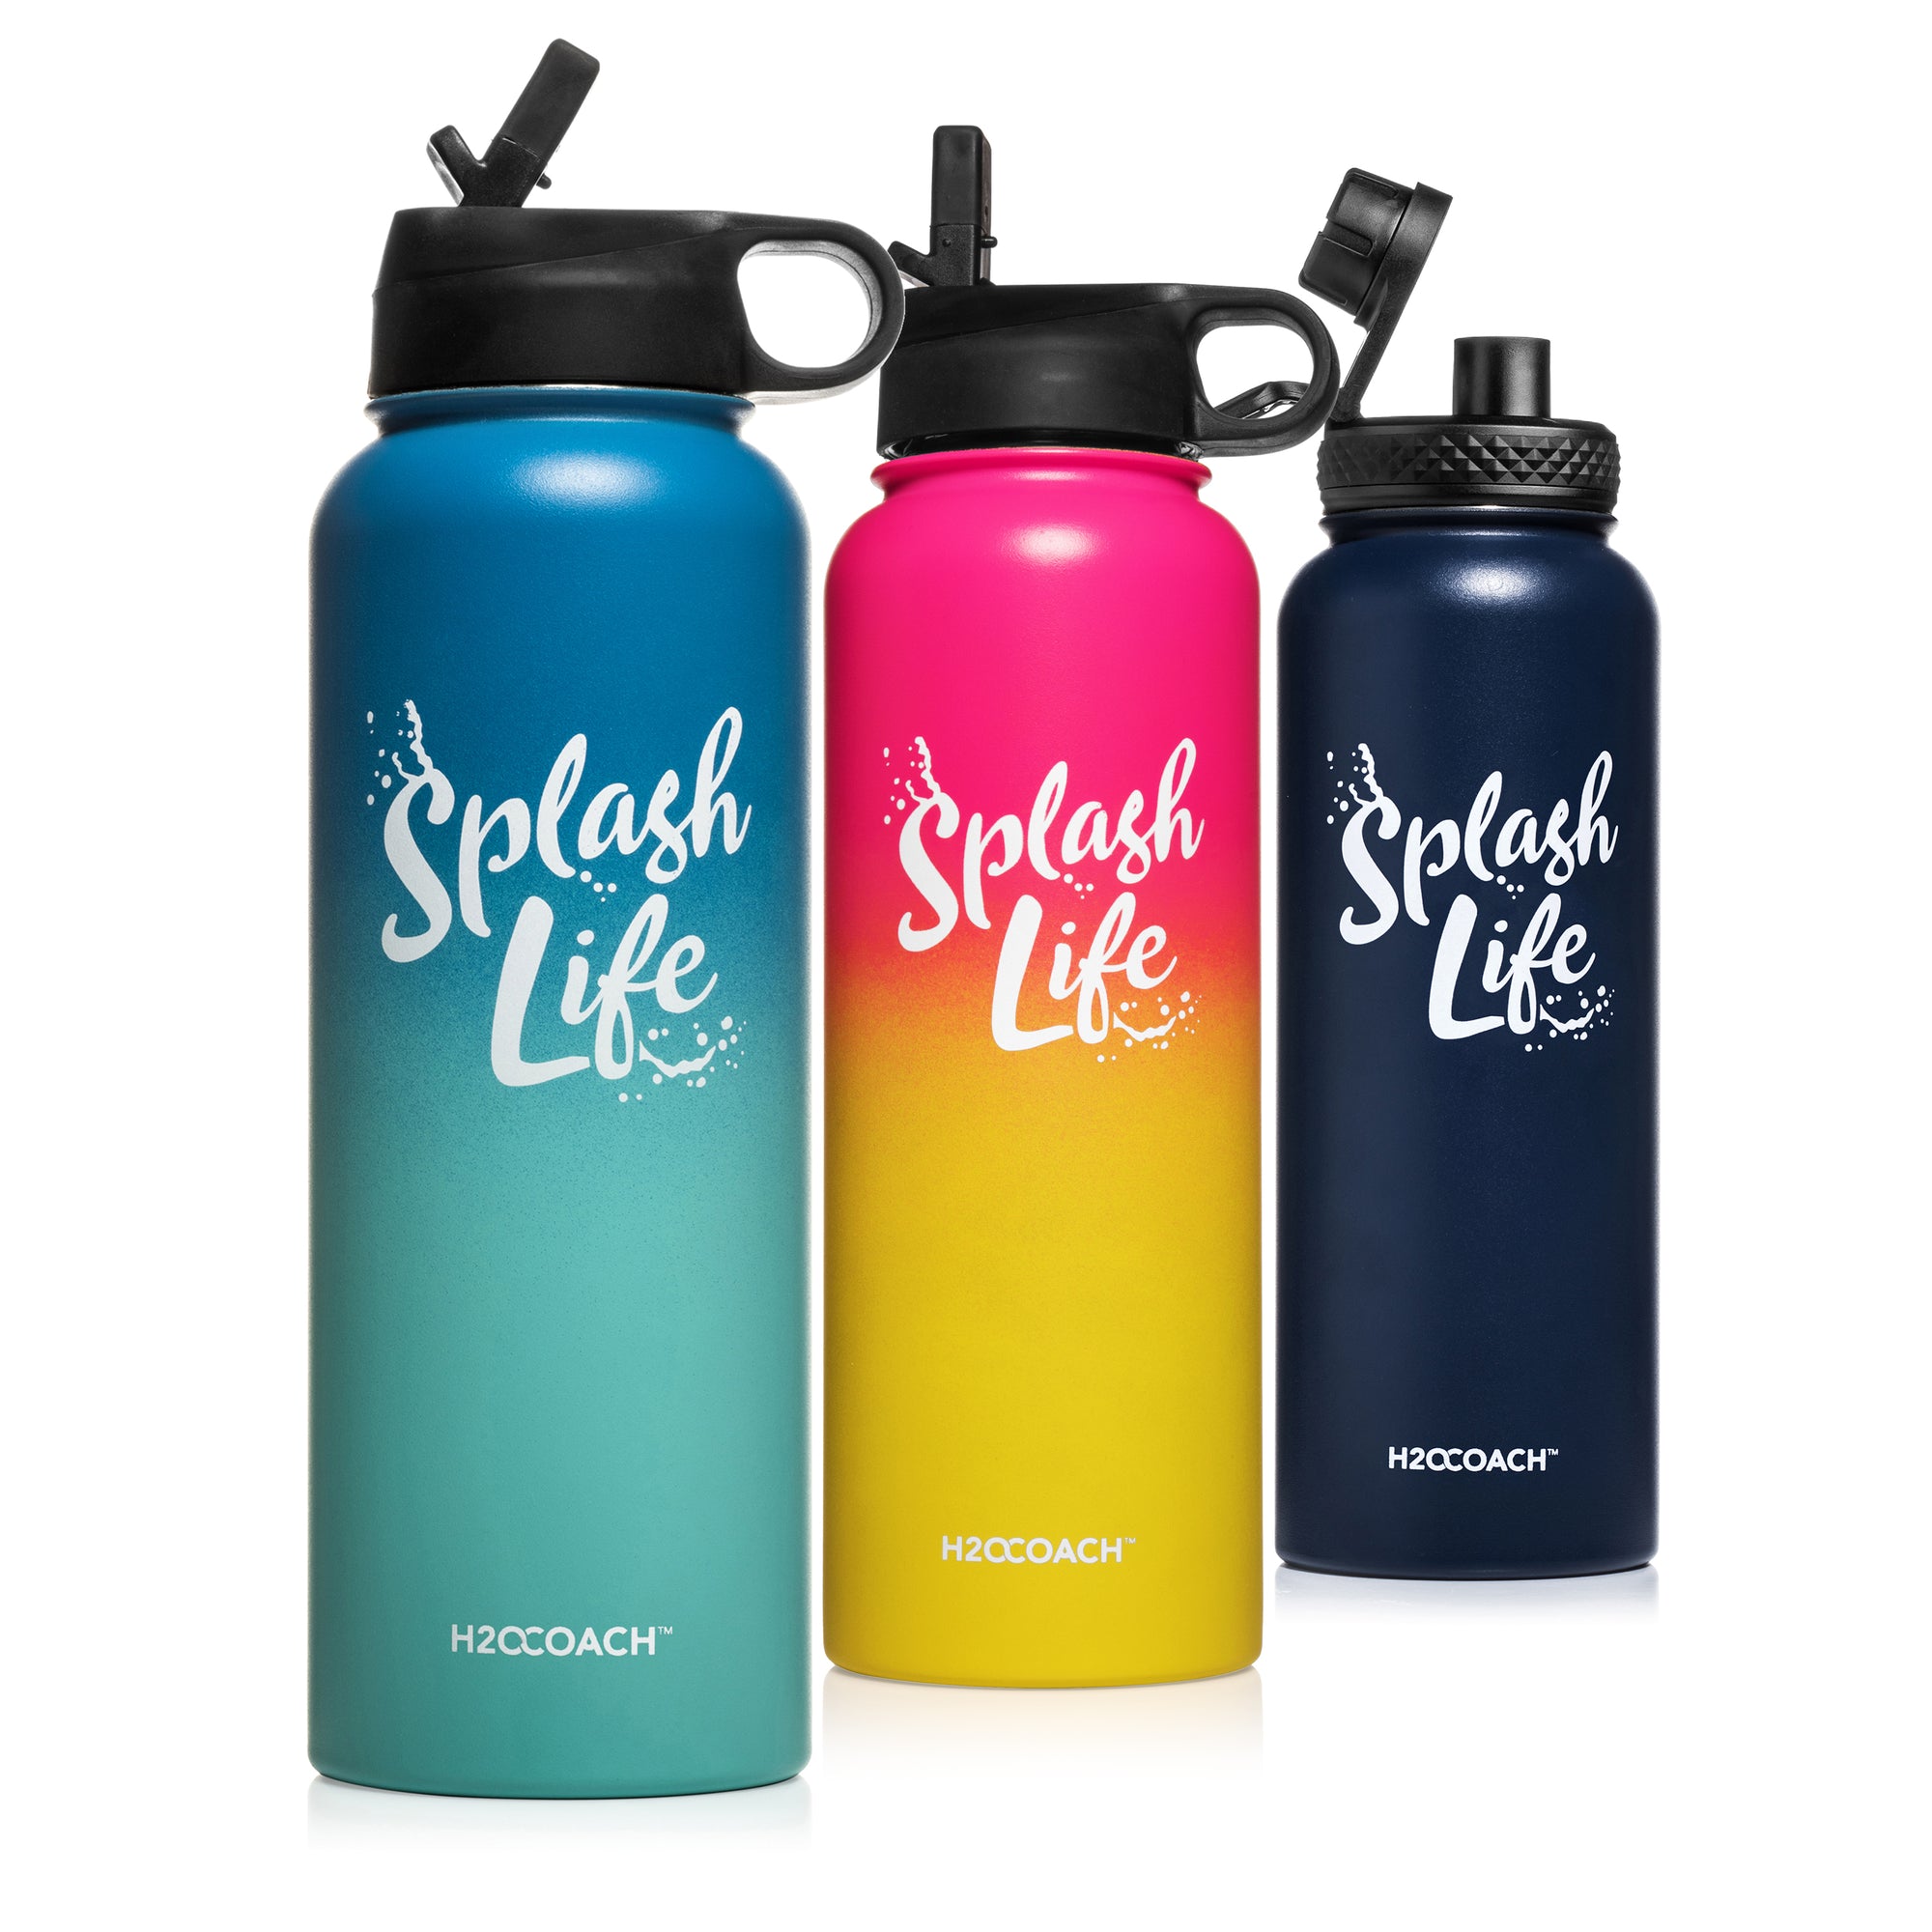 H2OCOACH - Splash Life -  Stainless Steel Water Bottle 40 oz Compact 1.8 Liter